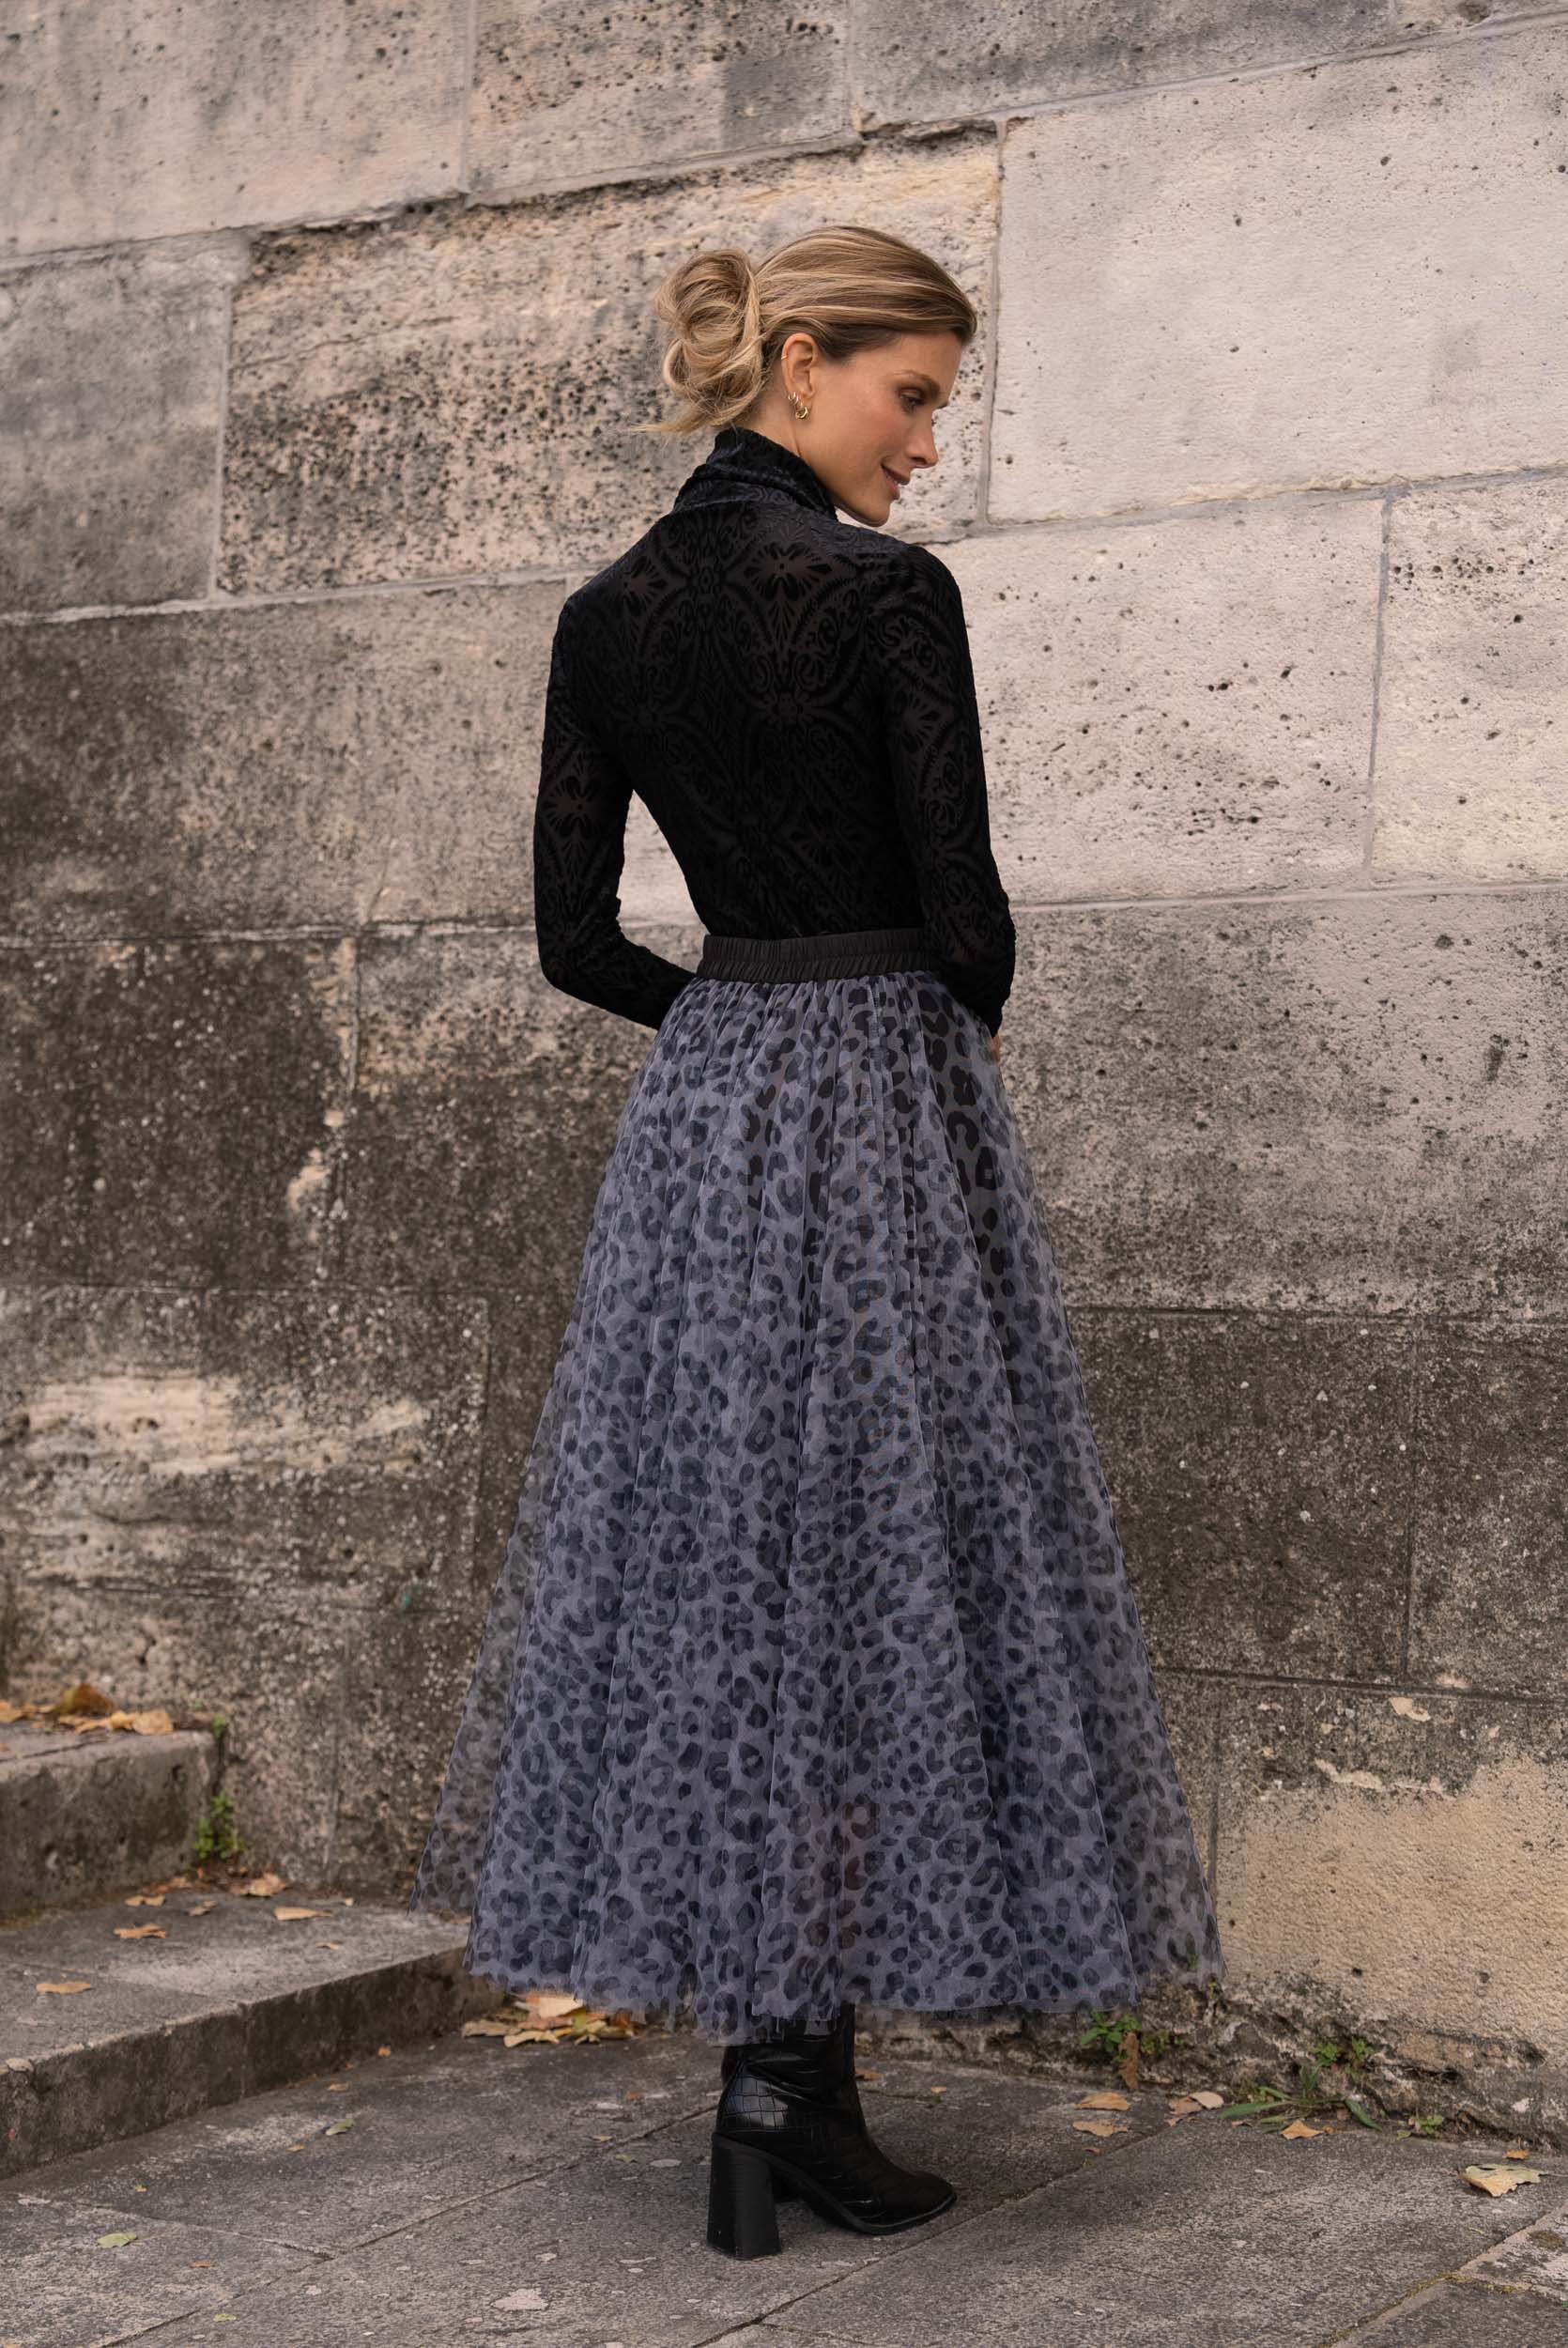 Aria large leopard tulle skirt